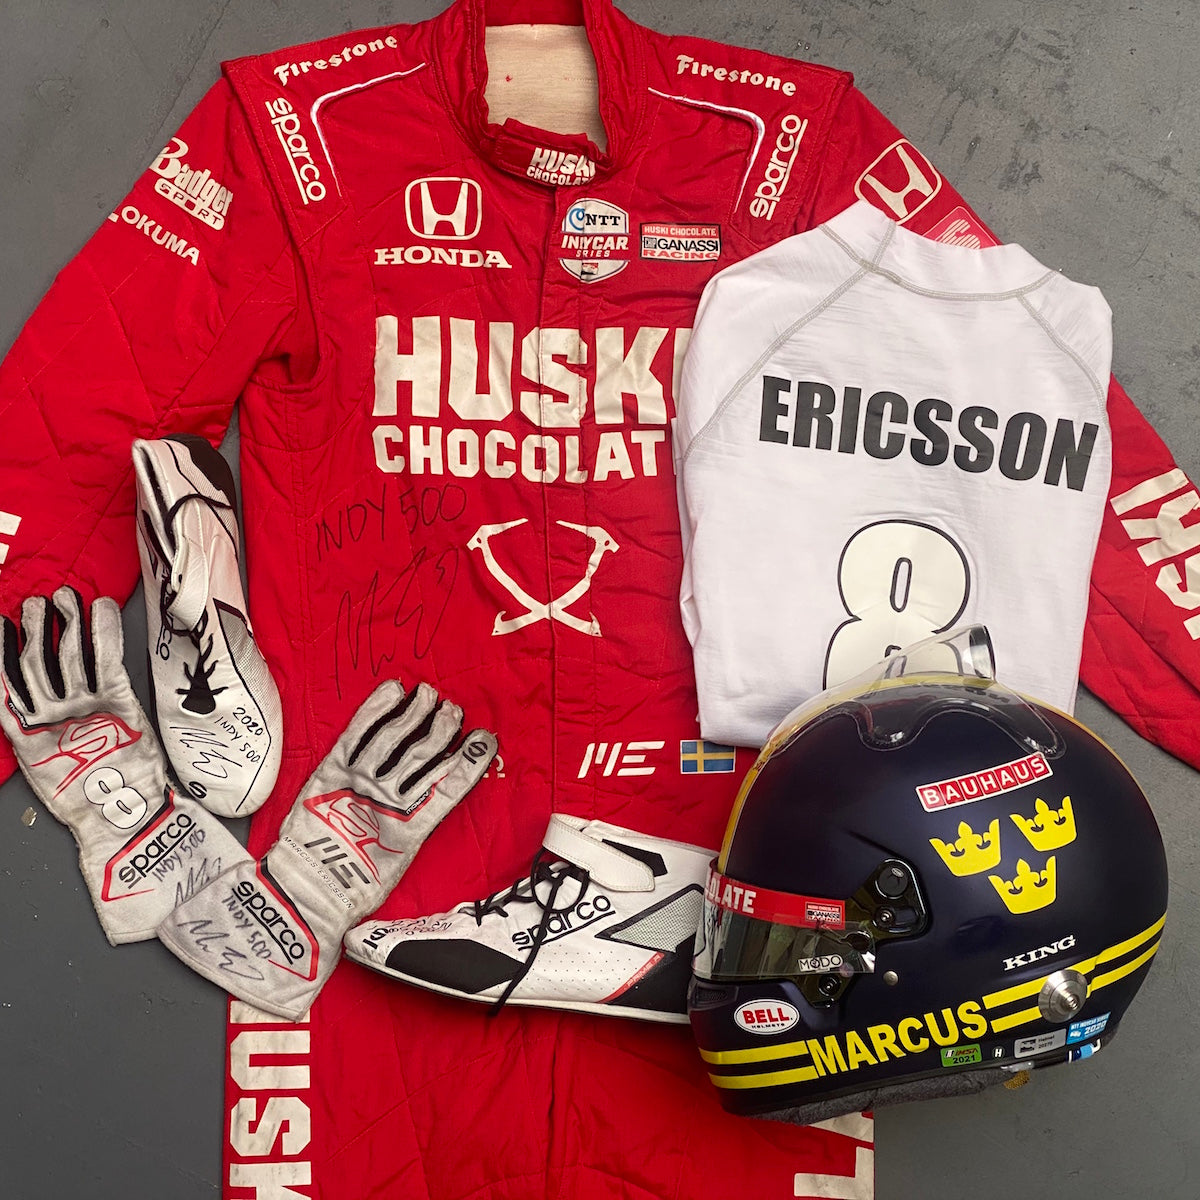 2020 Marcus Ericsson Signed Race Used Indy 500 Helmet, Suit, Nomex, Gloves And Boots Set